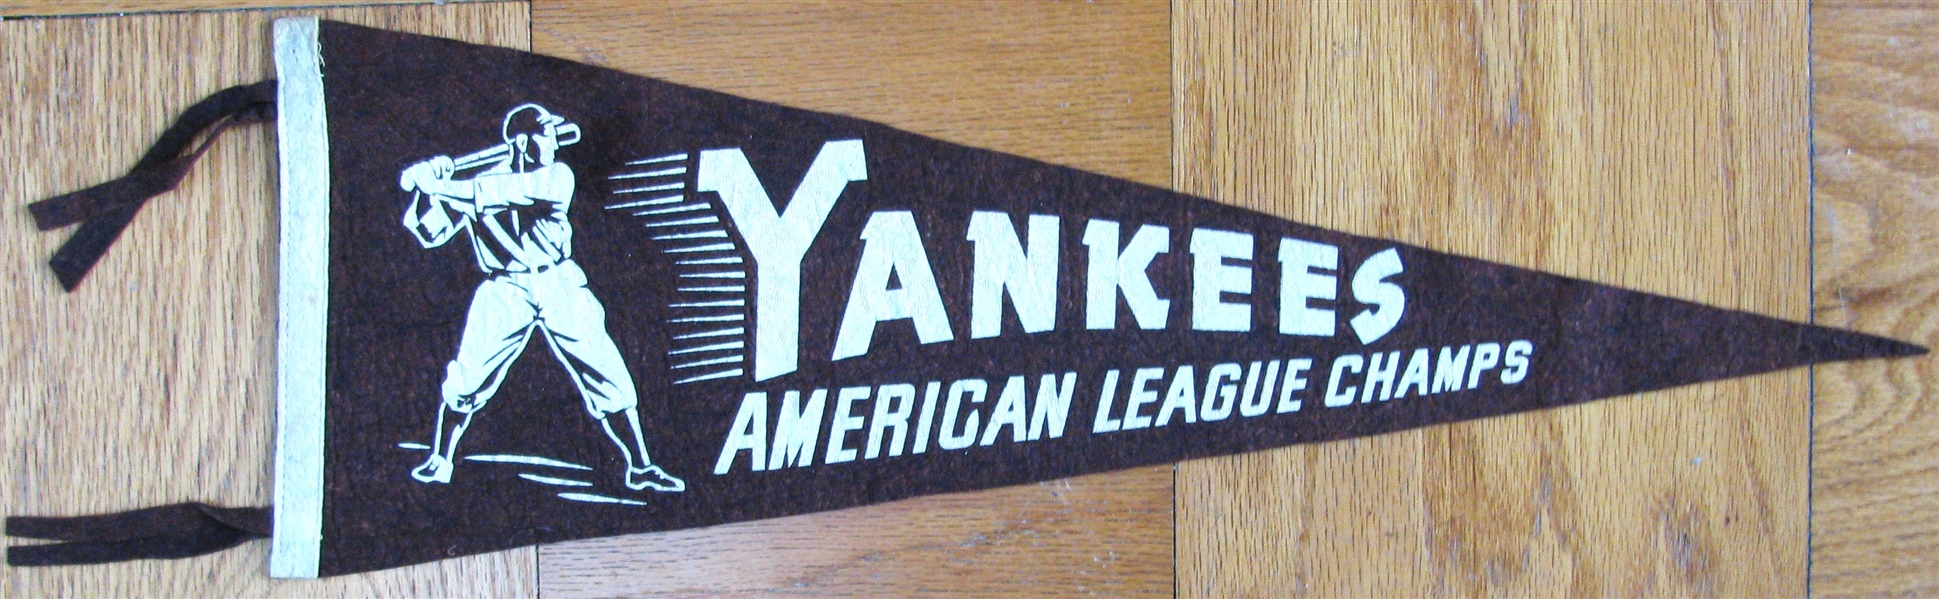 40's NEW YORK YANKEES AMERICAN LEAGUE CHAMPIONS 3/4 SIZE PENNANT